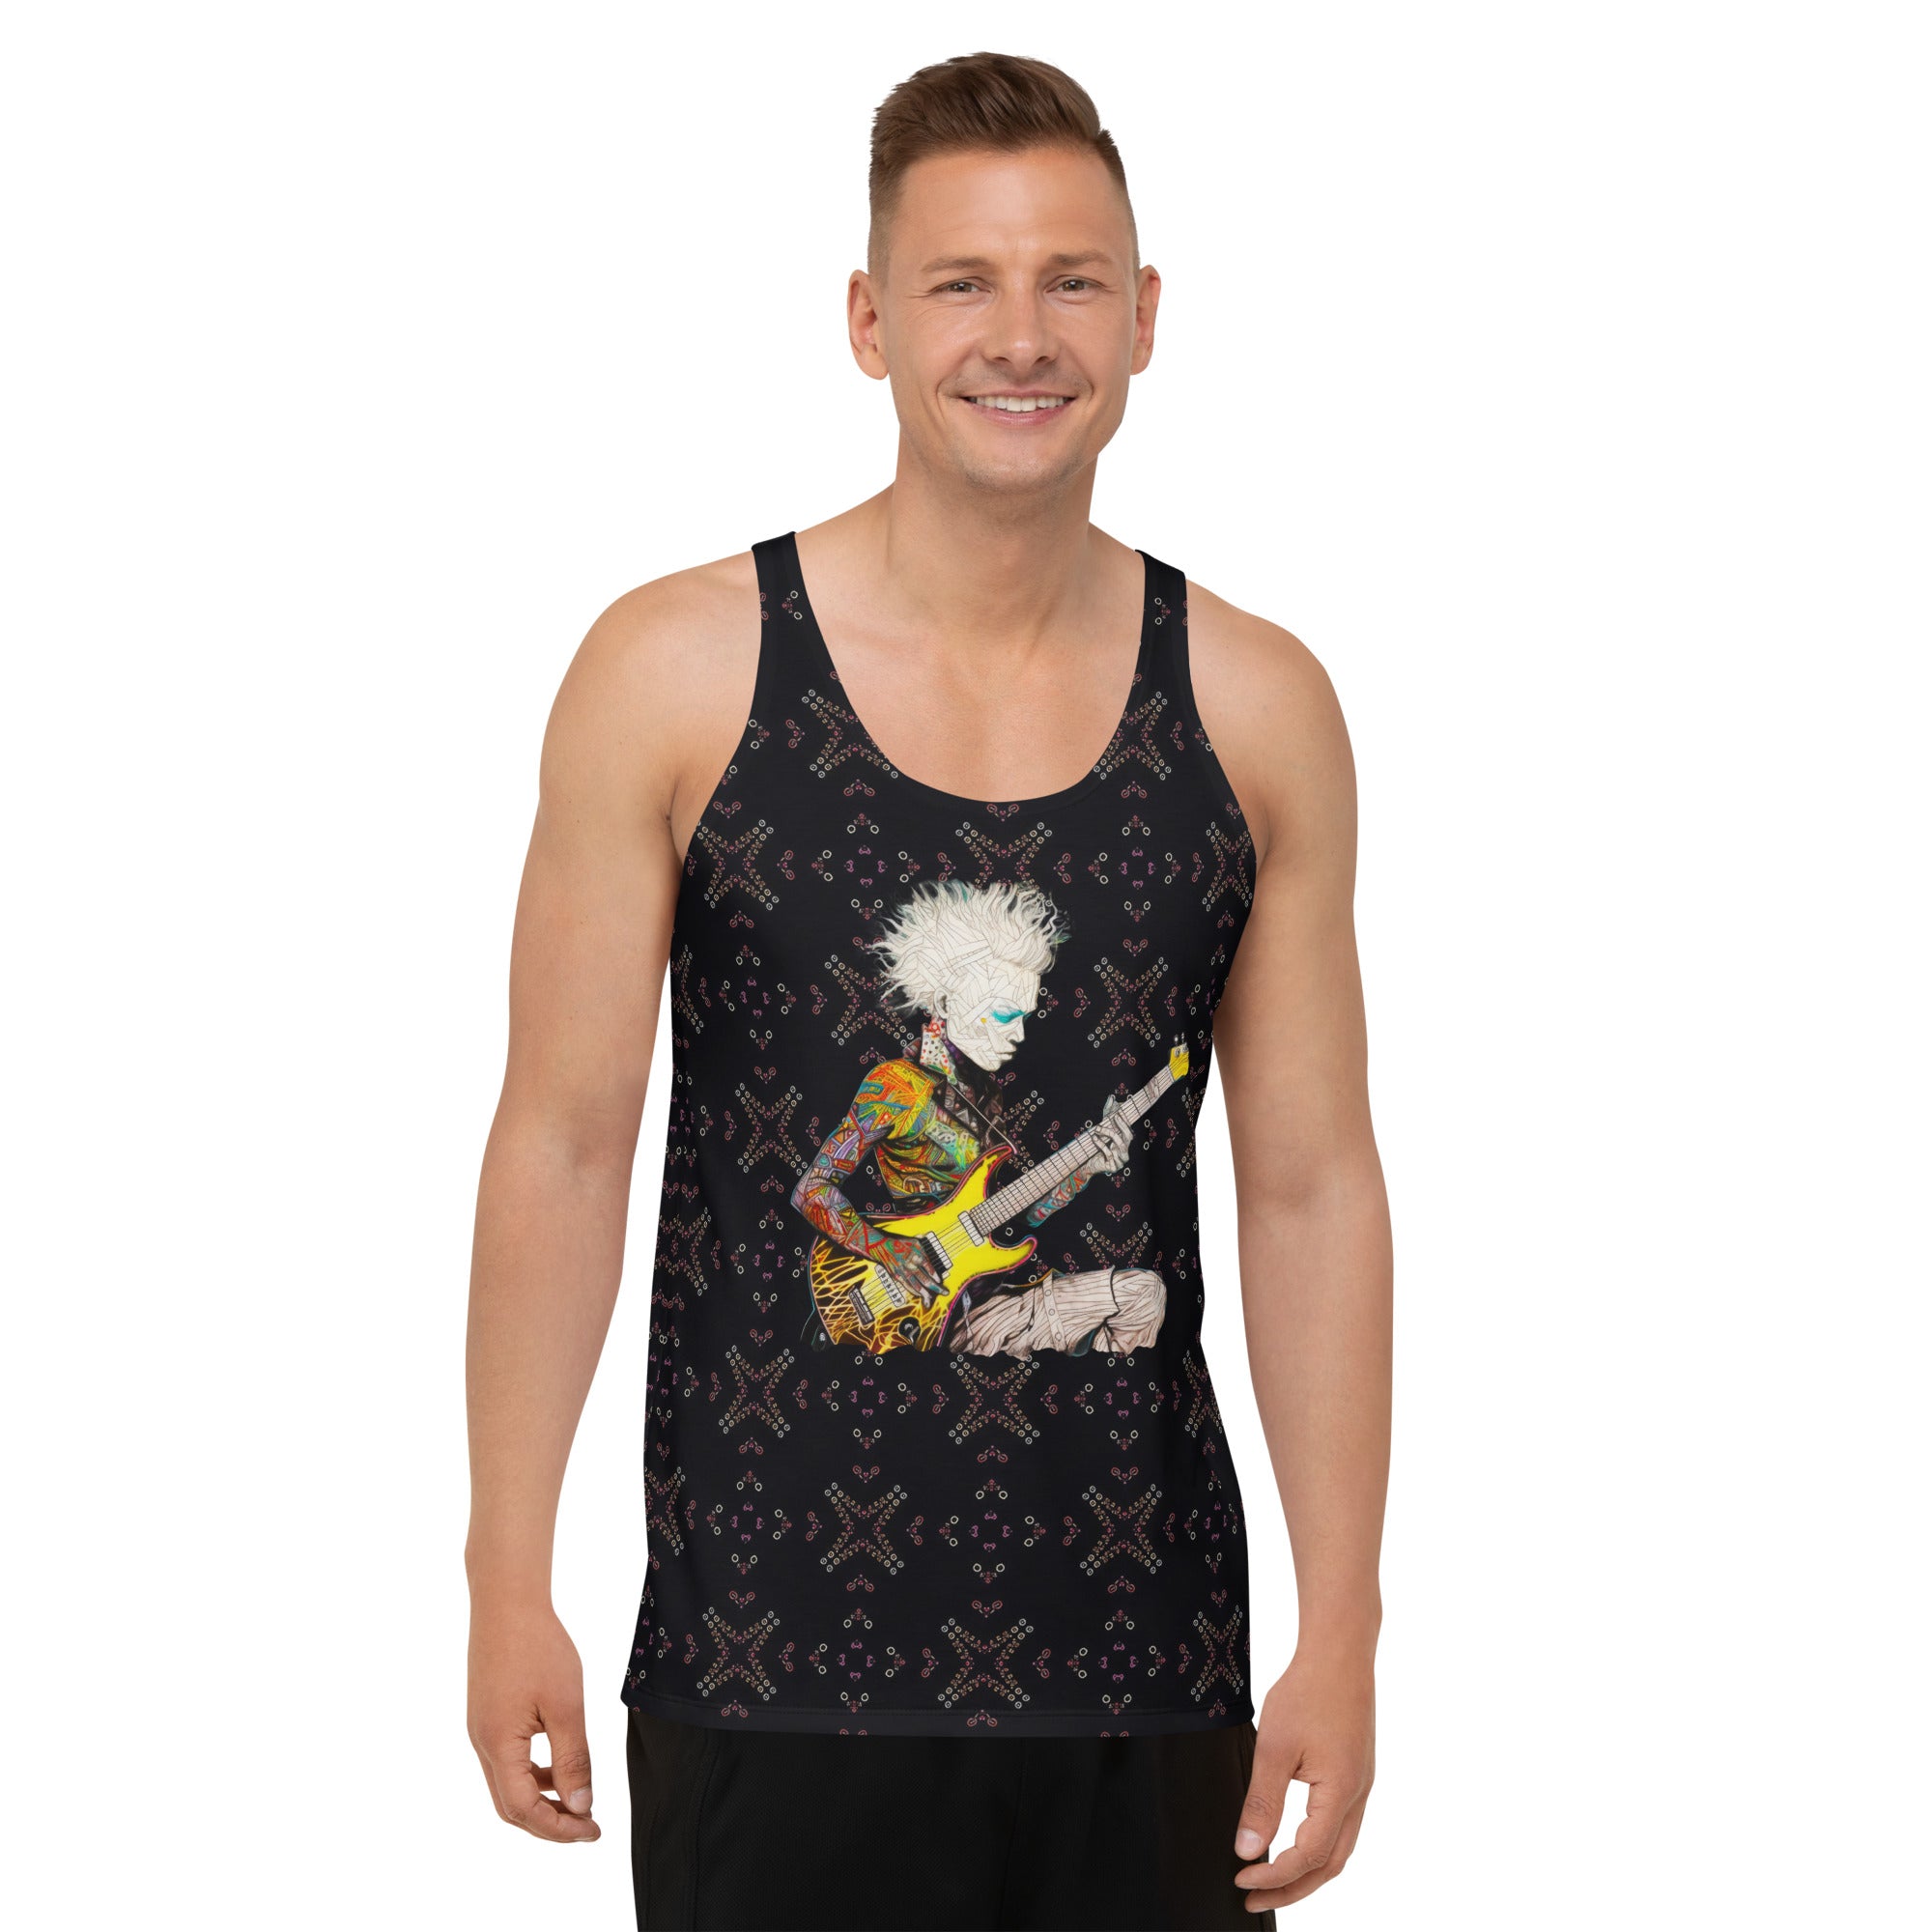 Pixel Pop Men's Tank Top in vibrant colors on white background.